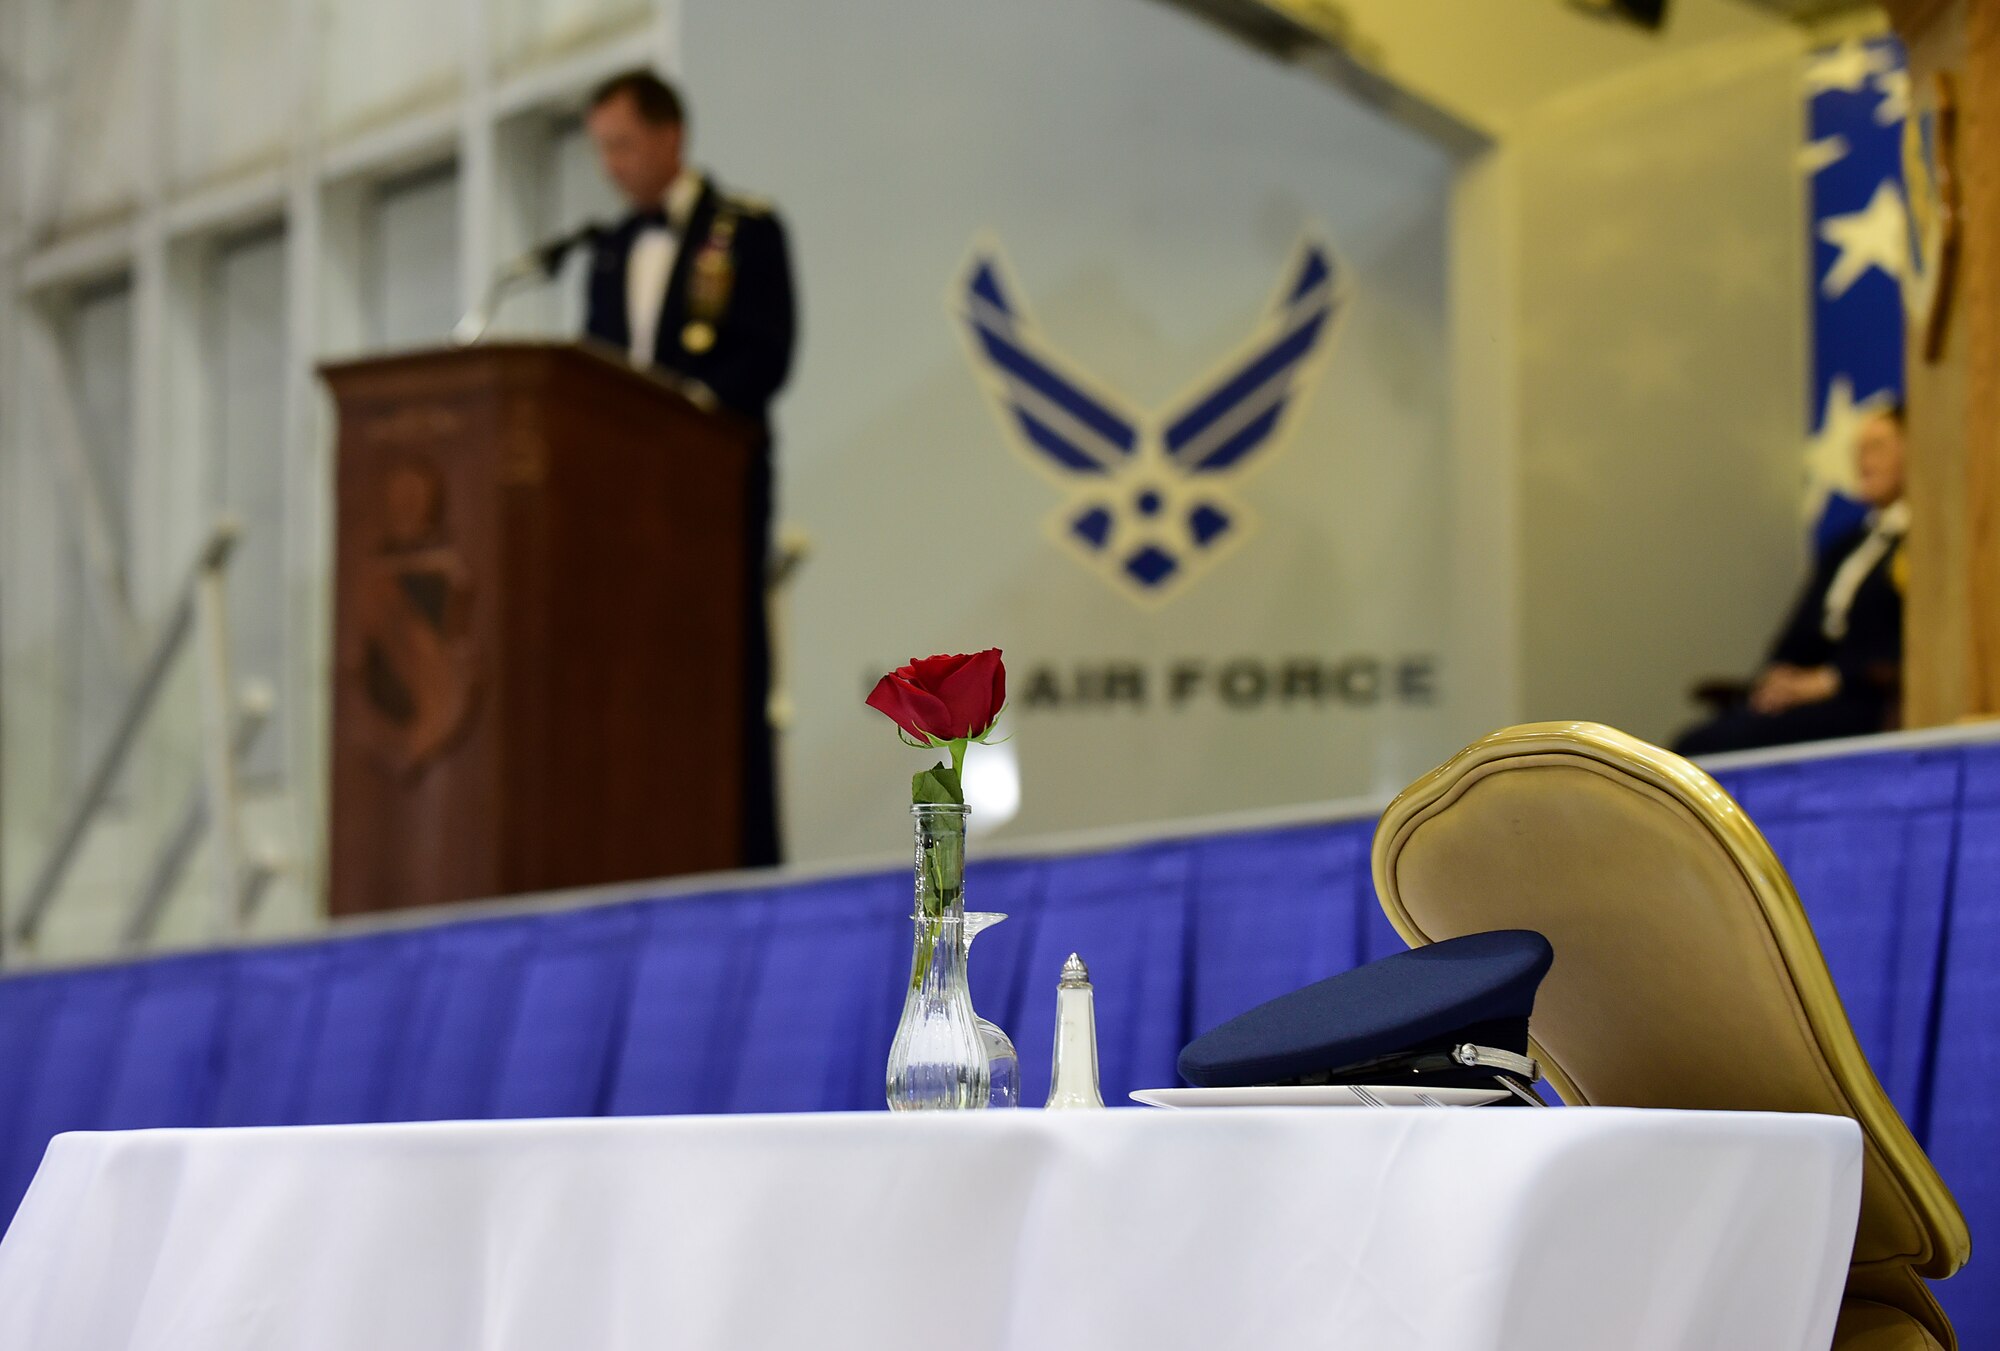 Col. Christopher Sage, 4th Fighter Wing commander, speaks during the 4th Fighter Wing 75th Anniversary Gala, Sept. 16, 2017, at Seymour Johnson Air Force Base, North Carolina. The anniversary weekend also commemorated the Battle of Britain when Nazi Germany bombed Britain during World War II. (U.S. Air Force photo by Airman 1st Class Kenneth Boyton)